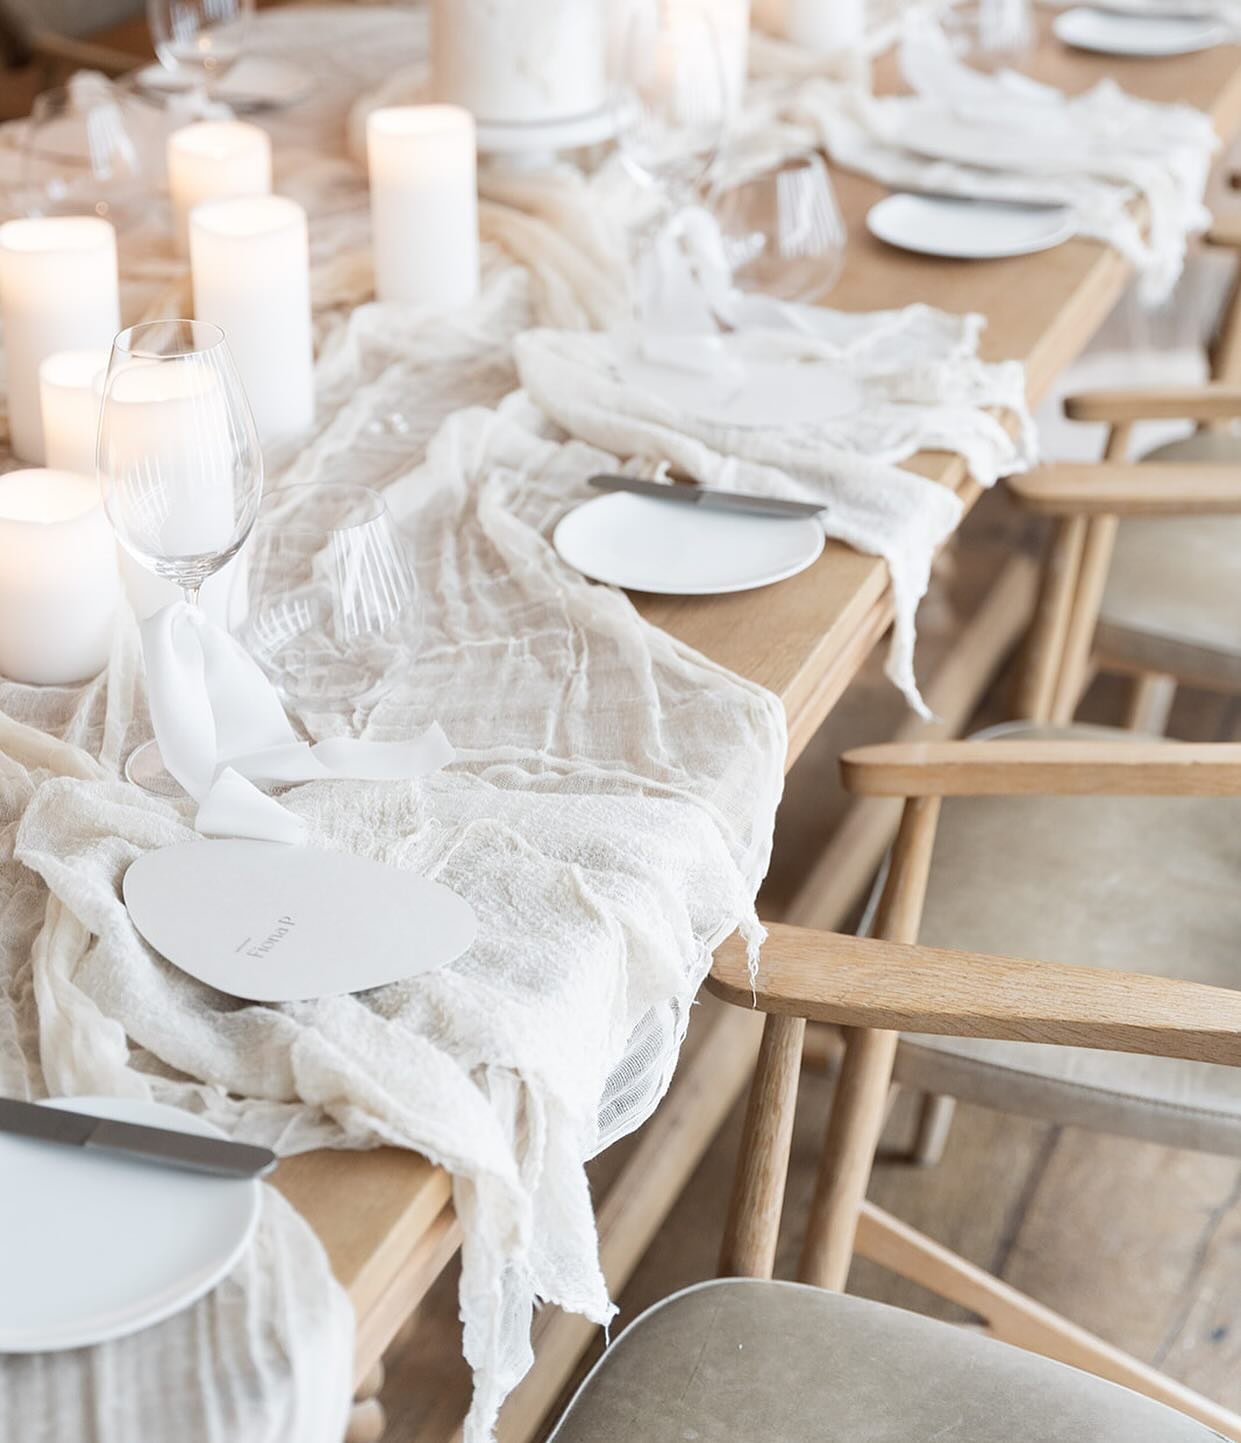 This time last year &mdash; An ethereal &lsquo;Up in the Clouds&rsquo; baby shower at Hide. Captured by @marioncophotography 

Planning &amp; Design @studioporter 
Venue @hide_restaurant 
Stationery @holdstudiolondon 

__
#babyshower #babyshowerdecor